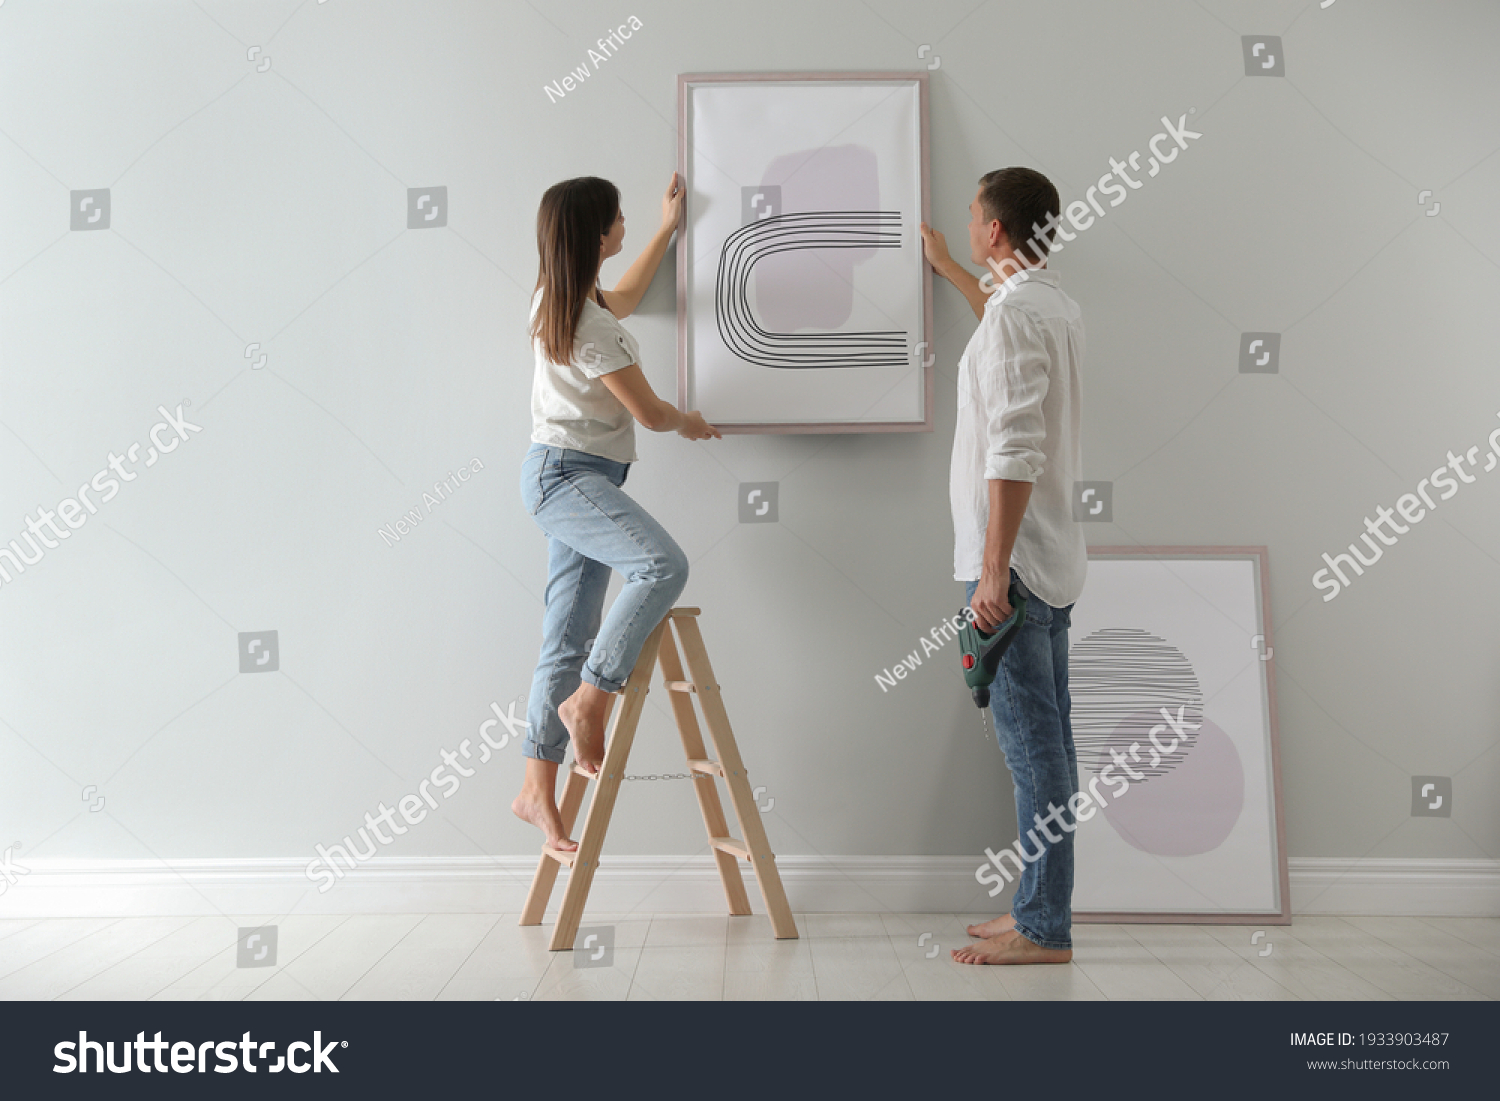 Couple hanging picture on wall together in room. Interior design #1933903487